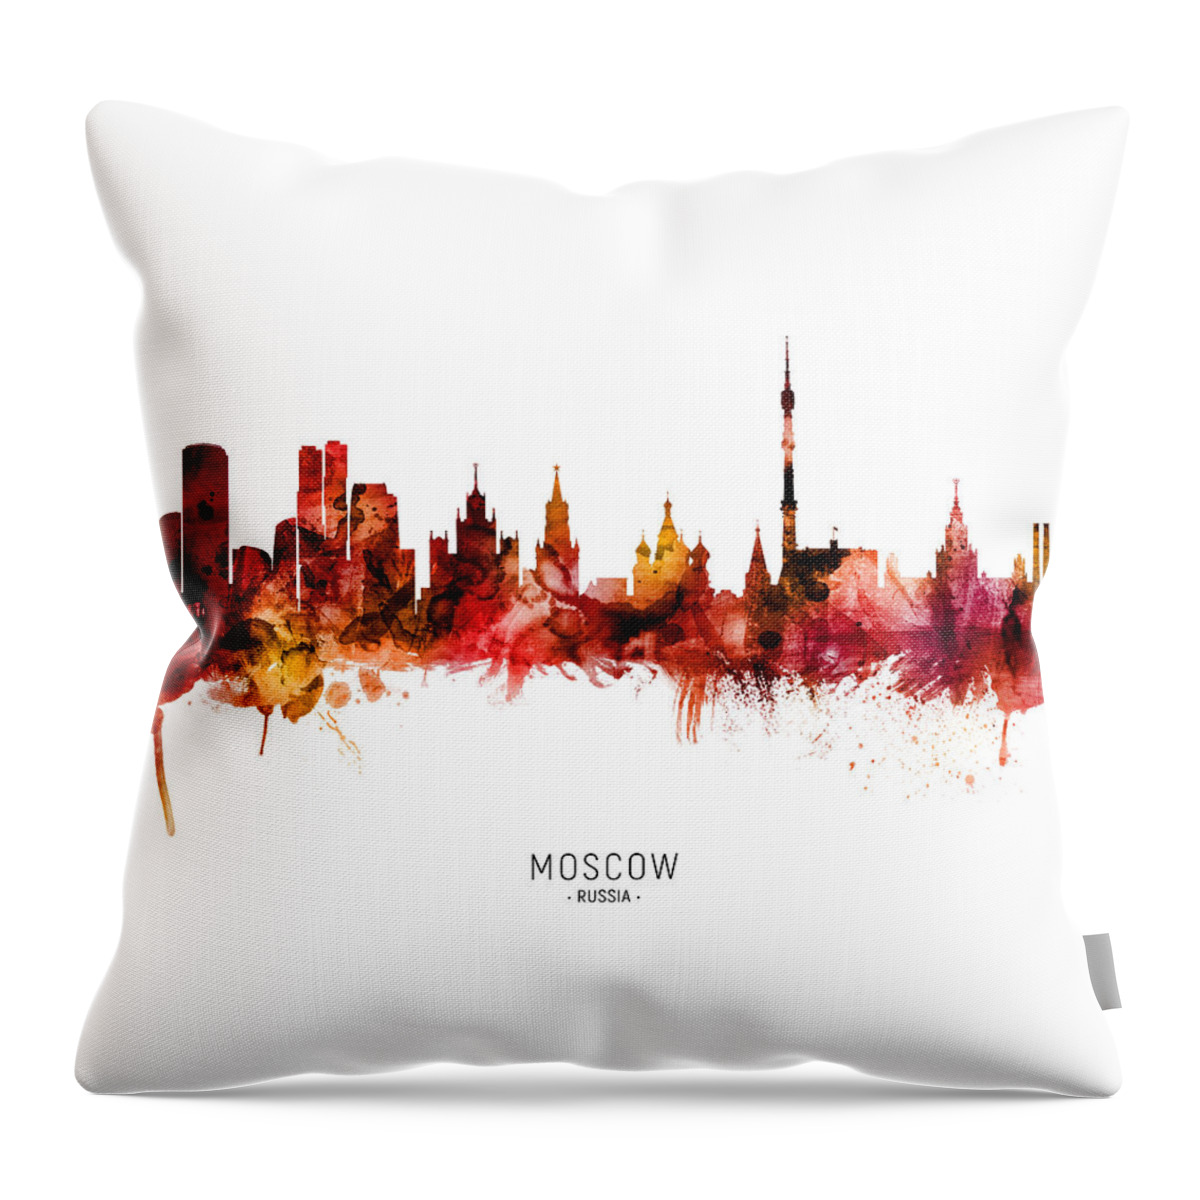 Moscow Throw Pillow featuring the digital art Moscow Russia Skyline #95 by Michael Tompsett